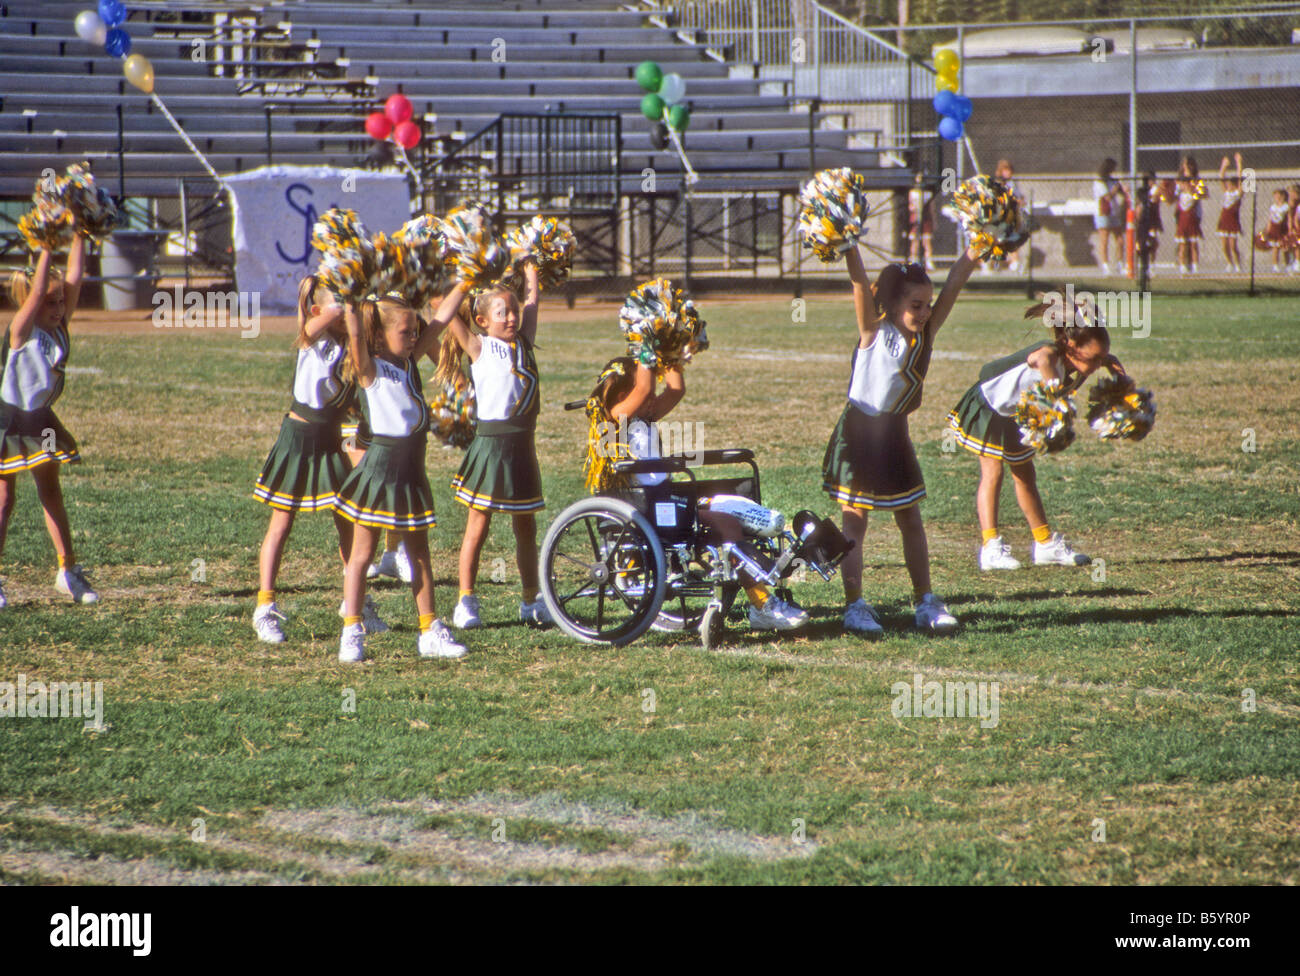 Squad of little girls, one in wheelchair, cheers during competition at football game, USA Stock Photo